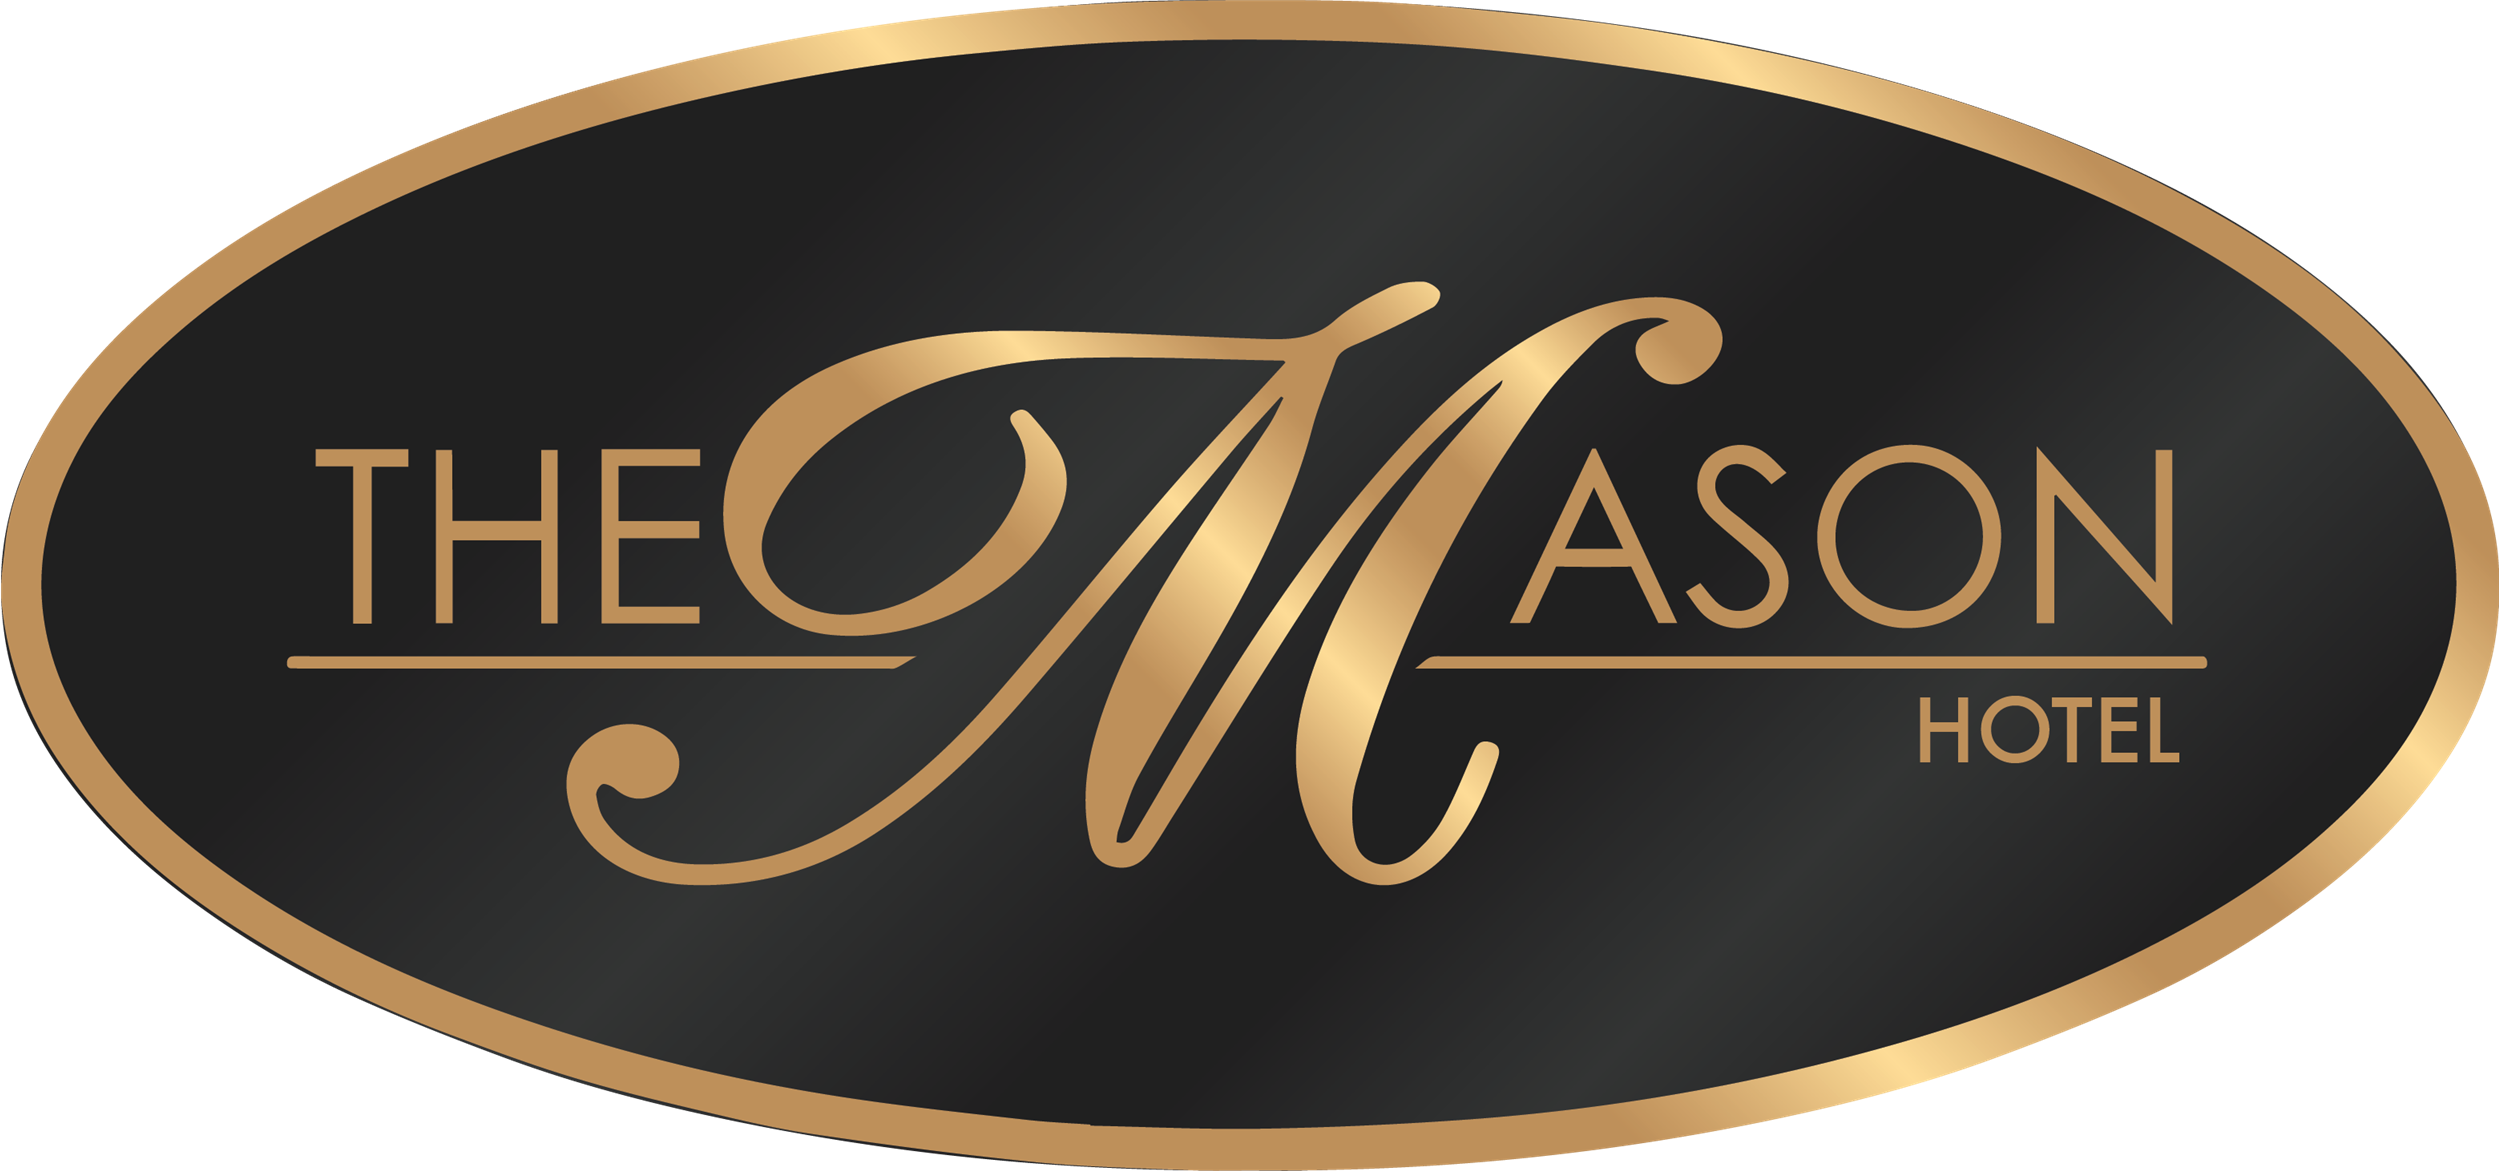 The Mason Logo -- The Mason in Gold lettering on a background of black 